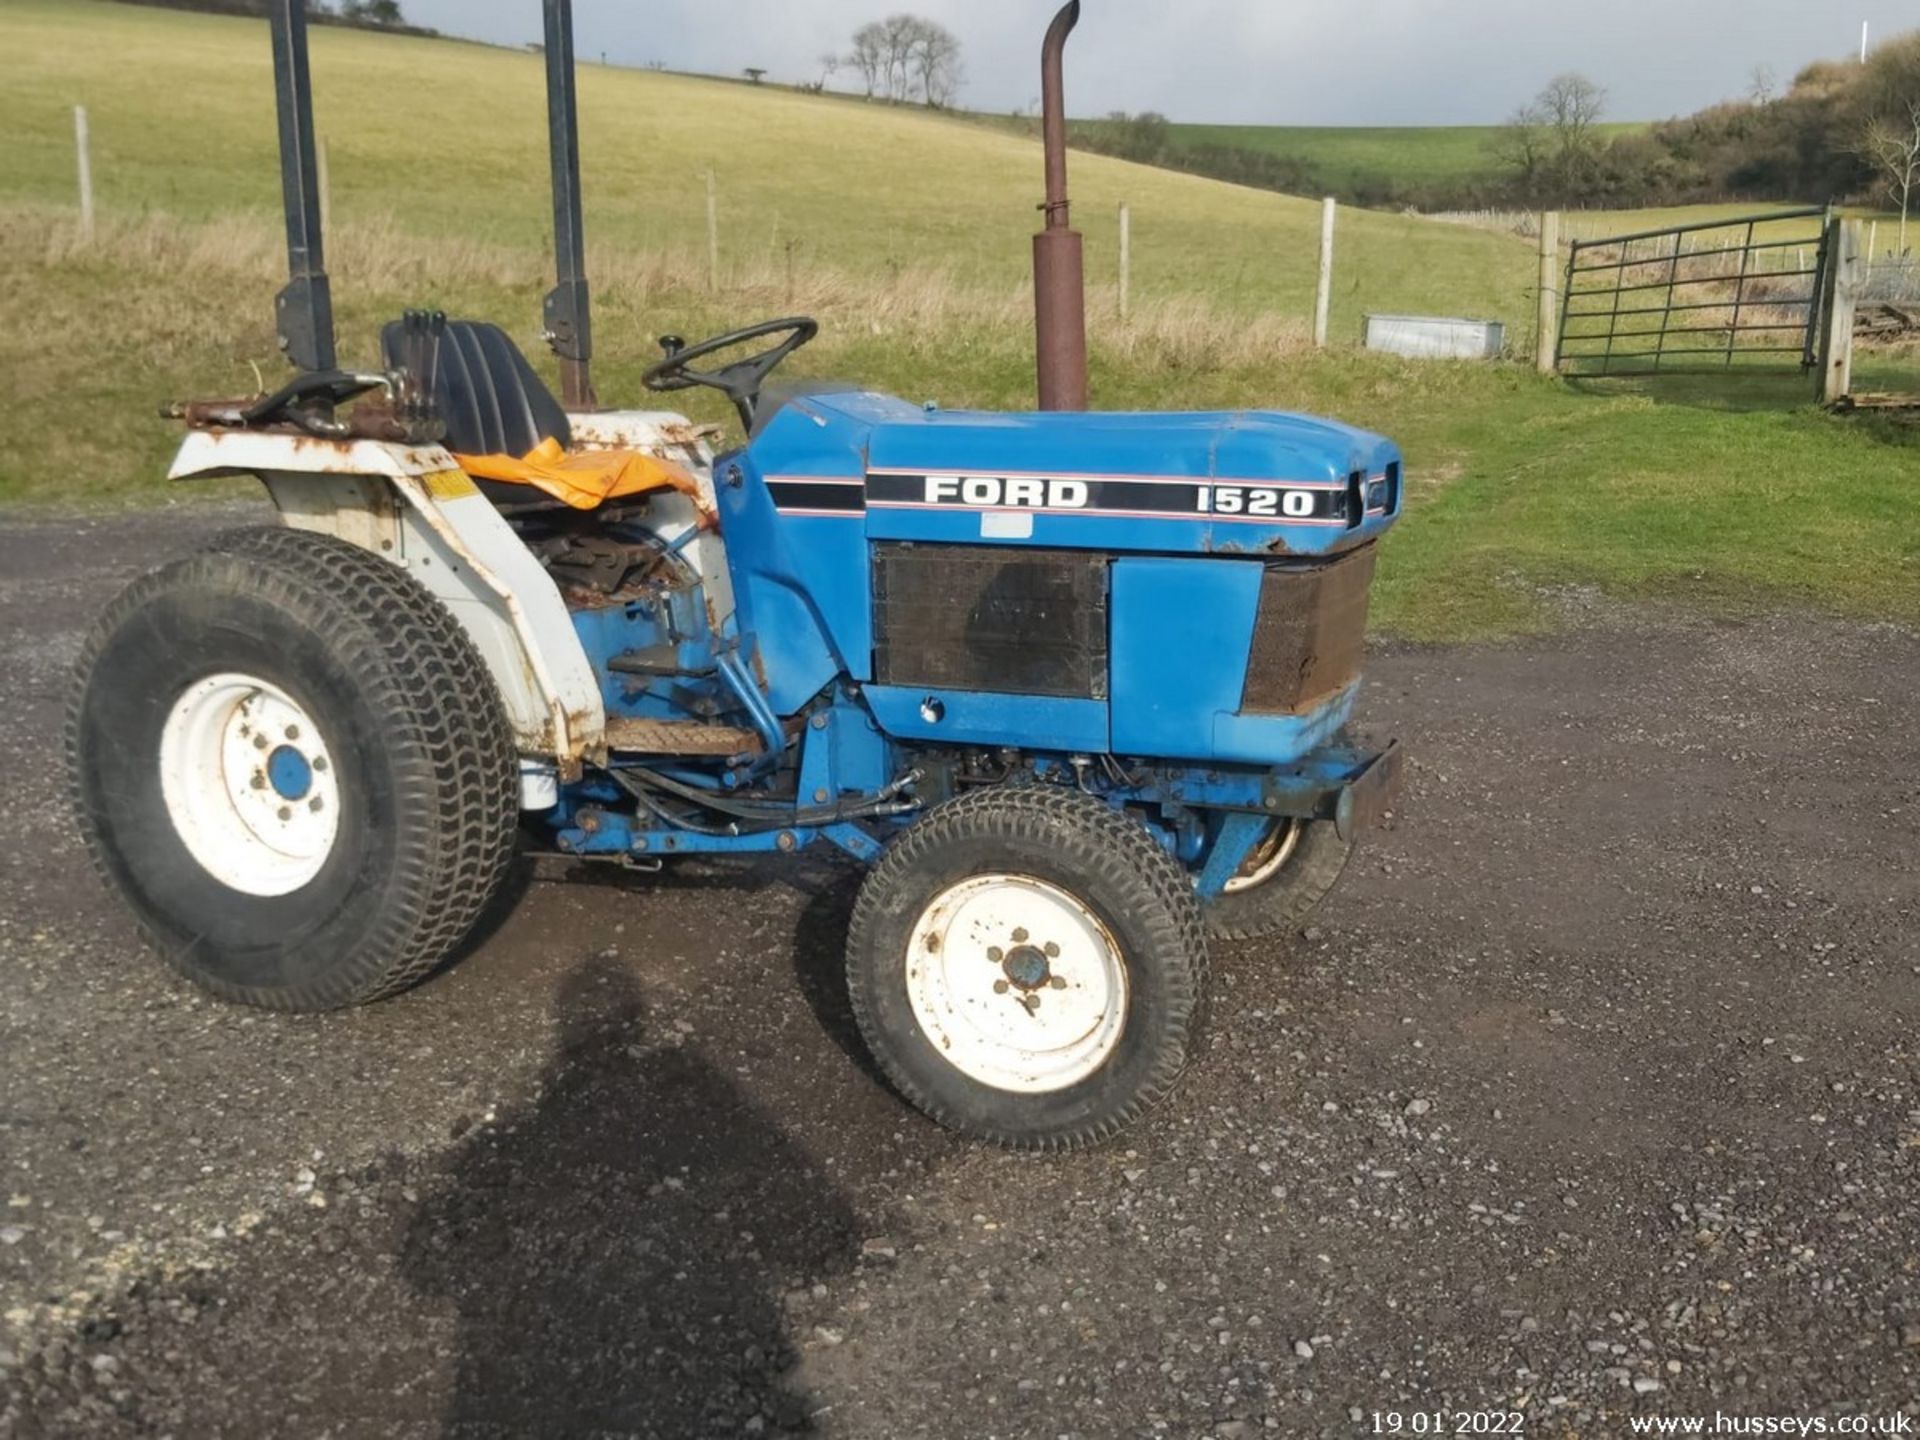 FORD 1520 COMPACT TRACTOR - Image 2 of 5